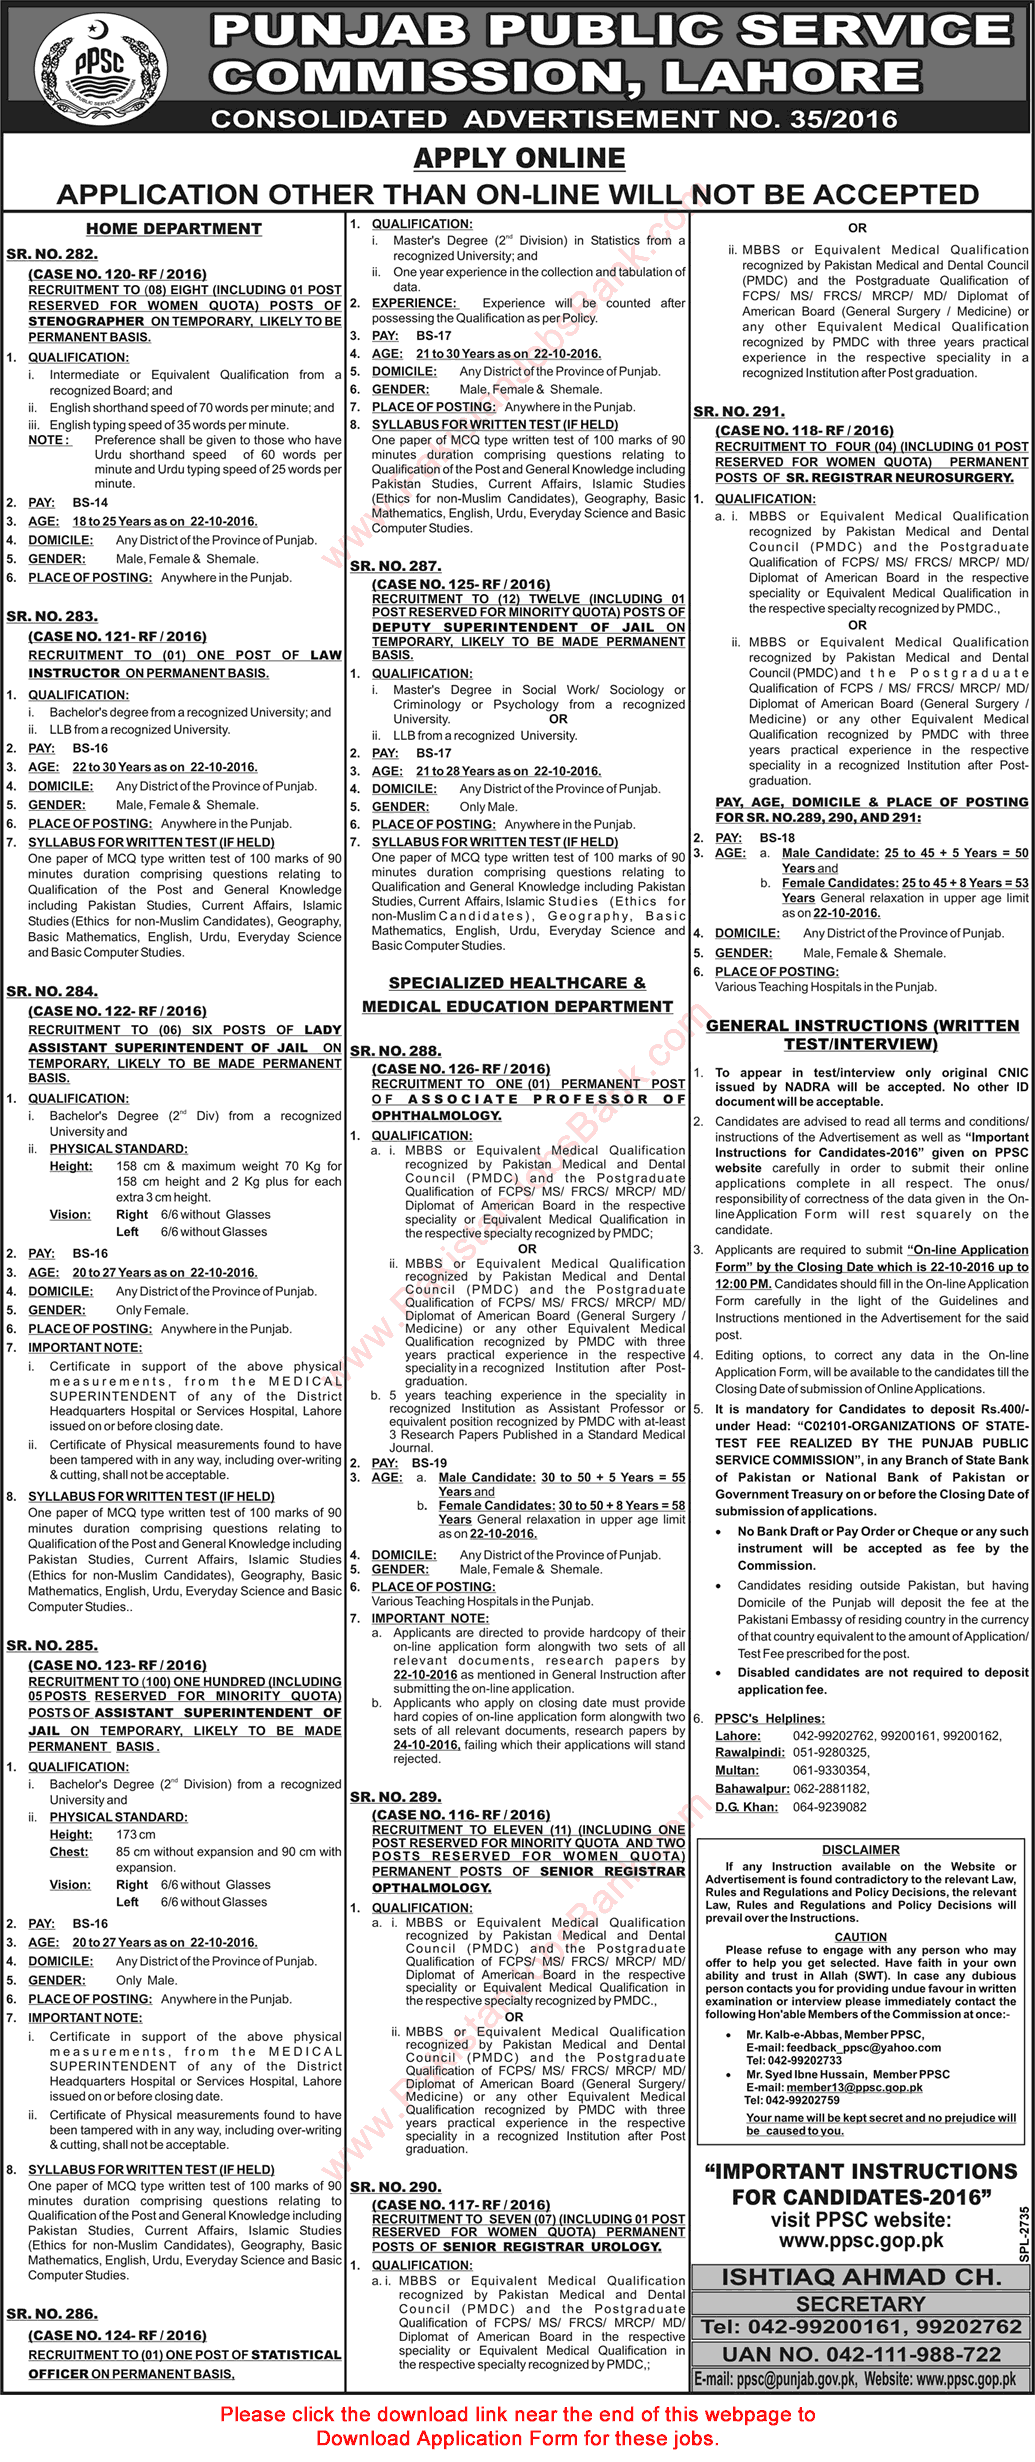 PPSC Jobs October 2016 Consolidated Advertisement No 35/2016 Apply Online Latest